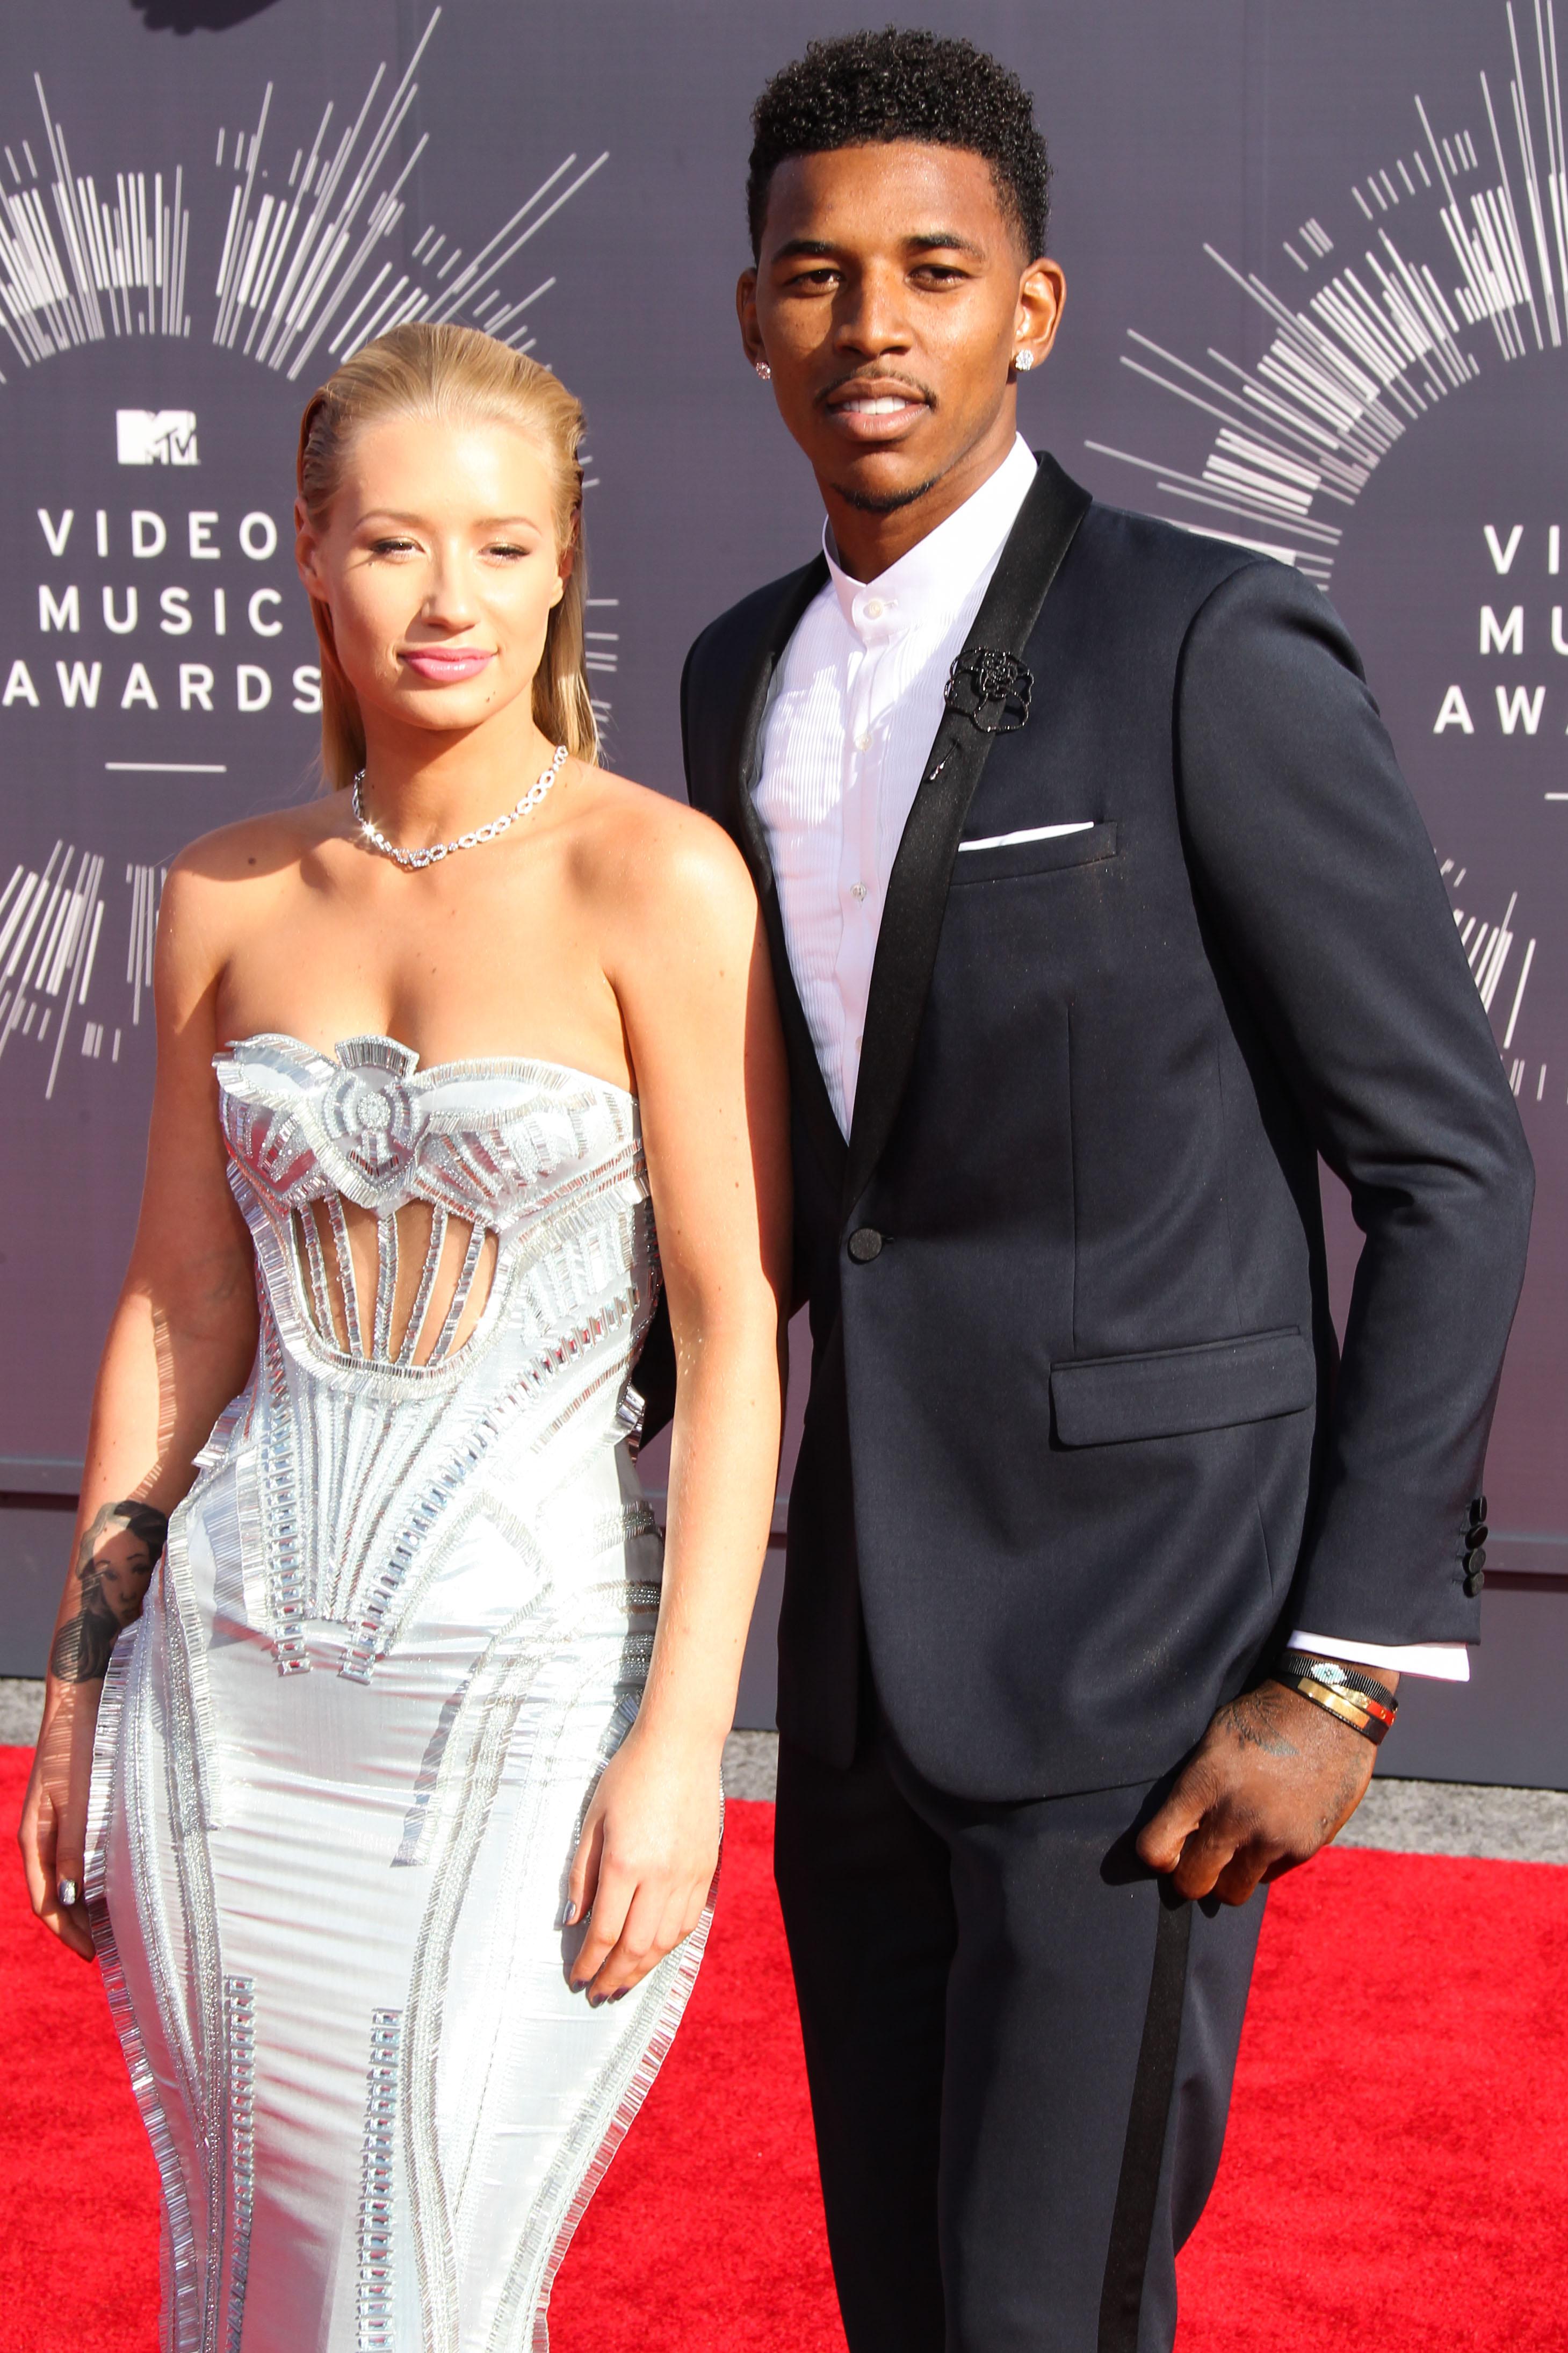 Iggy Azalea and Nick Young arrive at the 2014 MTV Video Music Awards